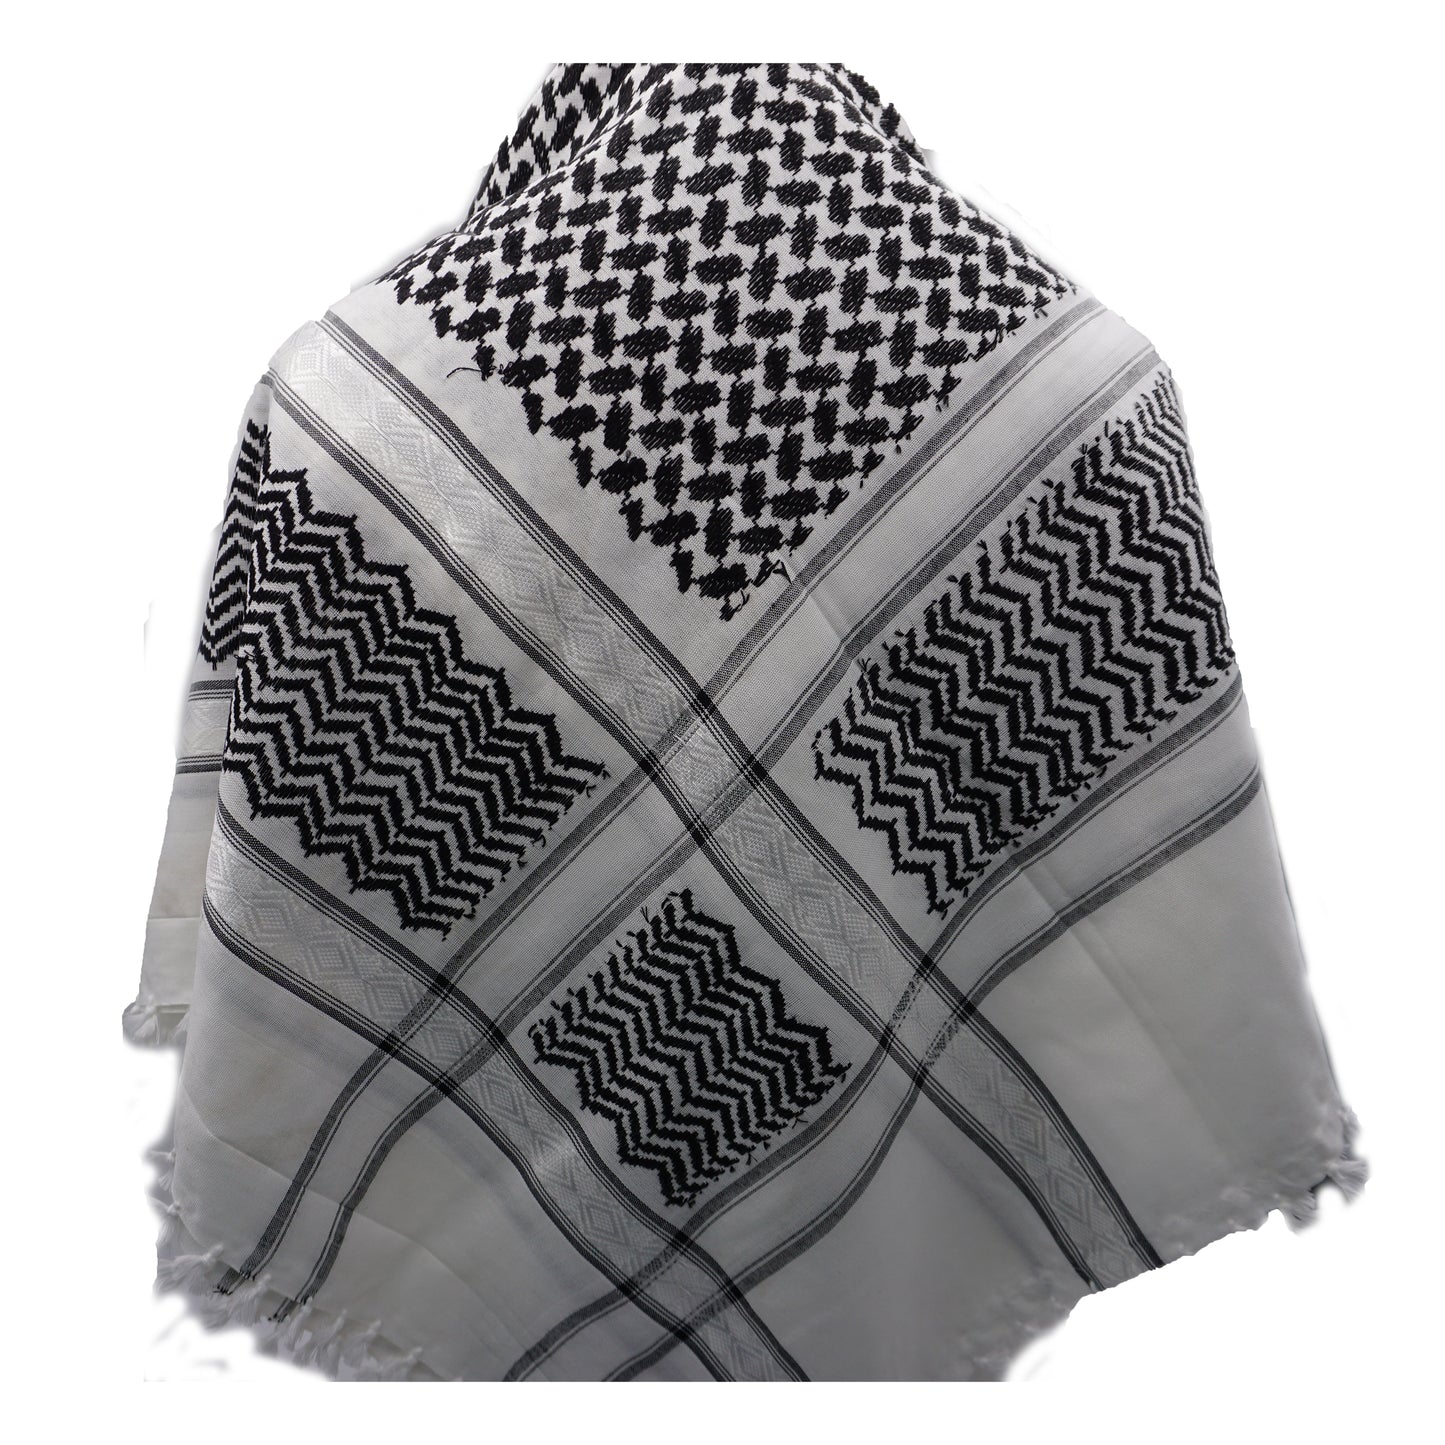 Arab 100% Soft Cotton Shemagh Scarf ( 3 colours) - Full Set 10 Pieces